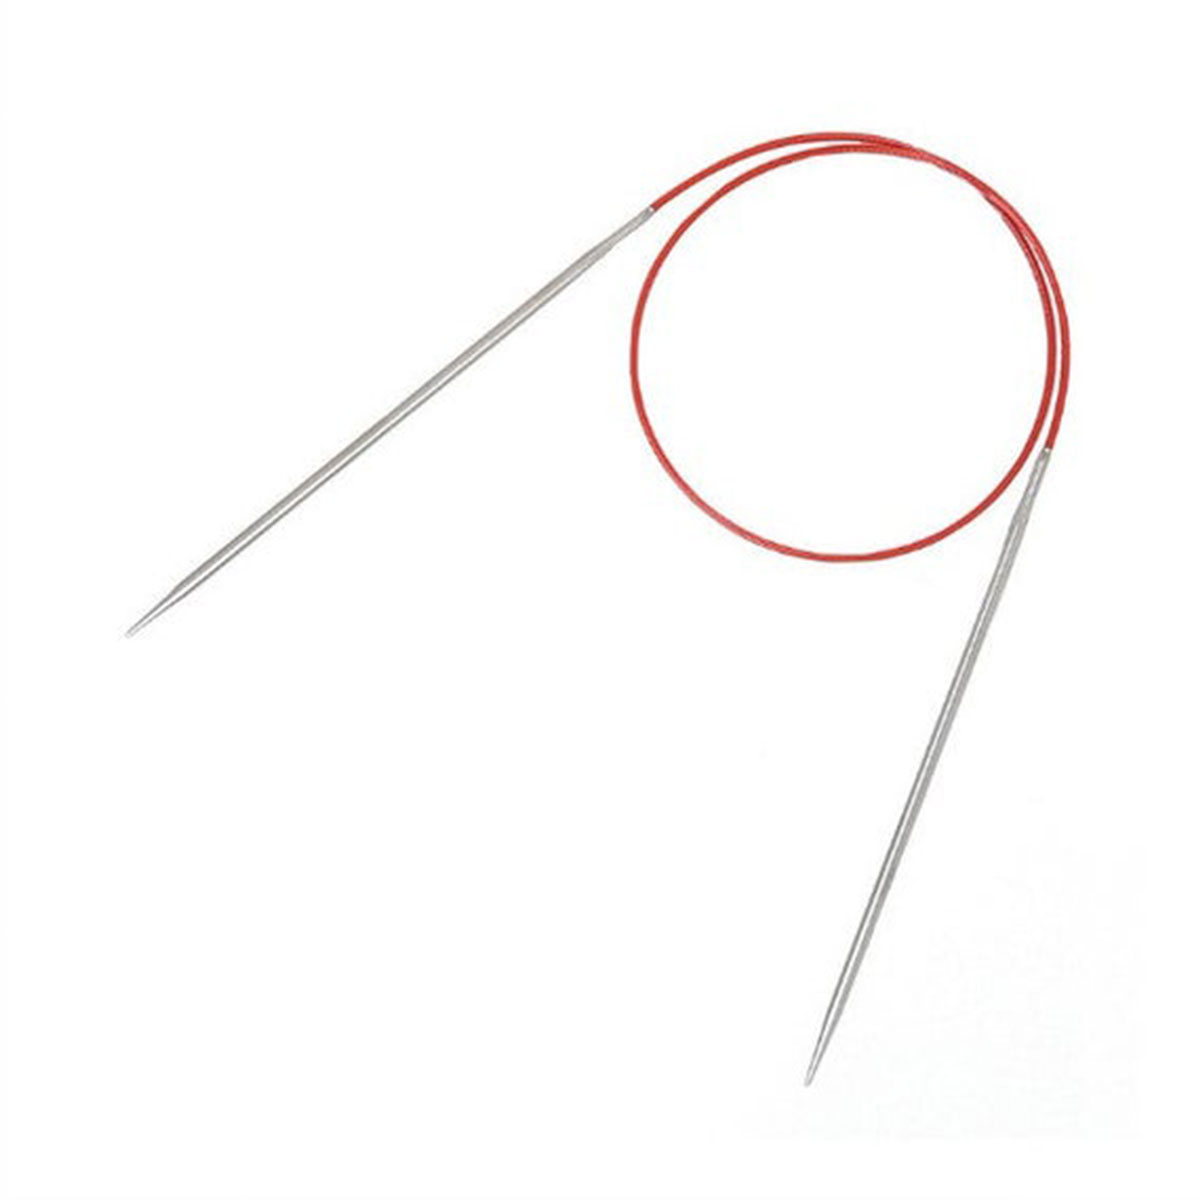 ChiaoGoo 7032-2.5 32-Inch Red Lace Stainless Steel Circular Knitting  Needles, 2.5/3mm